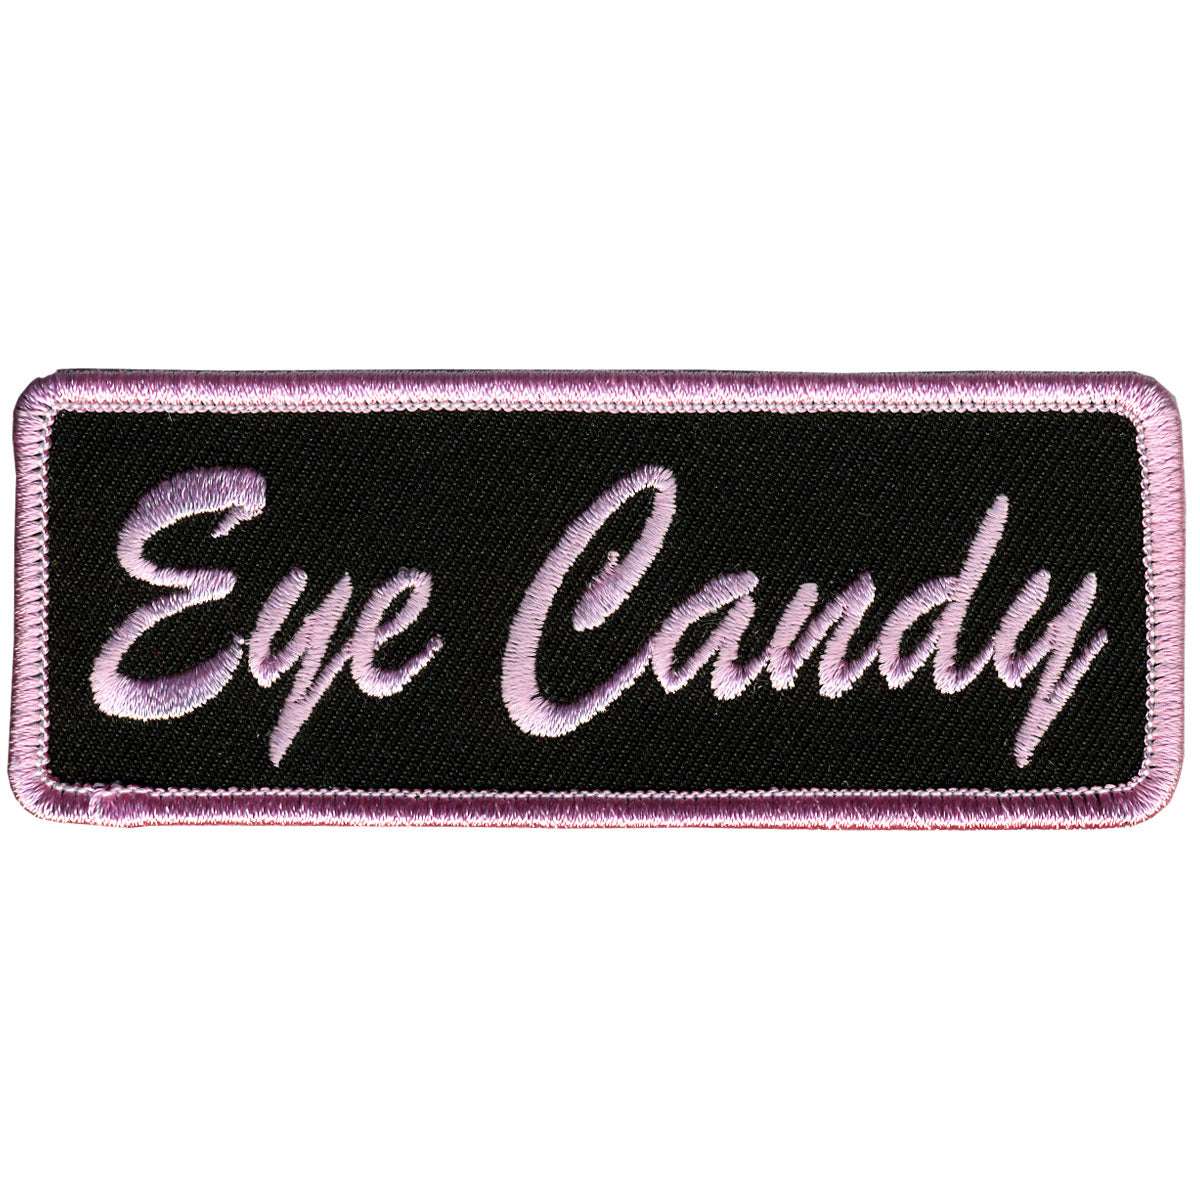 Hot Leathers Eye Candy Patch PPL9263